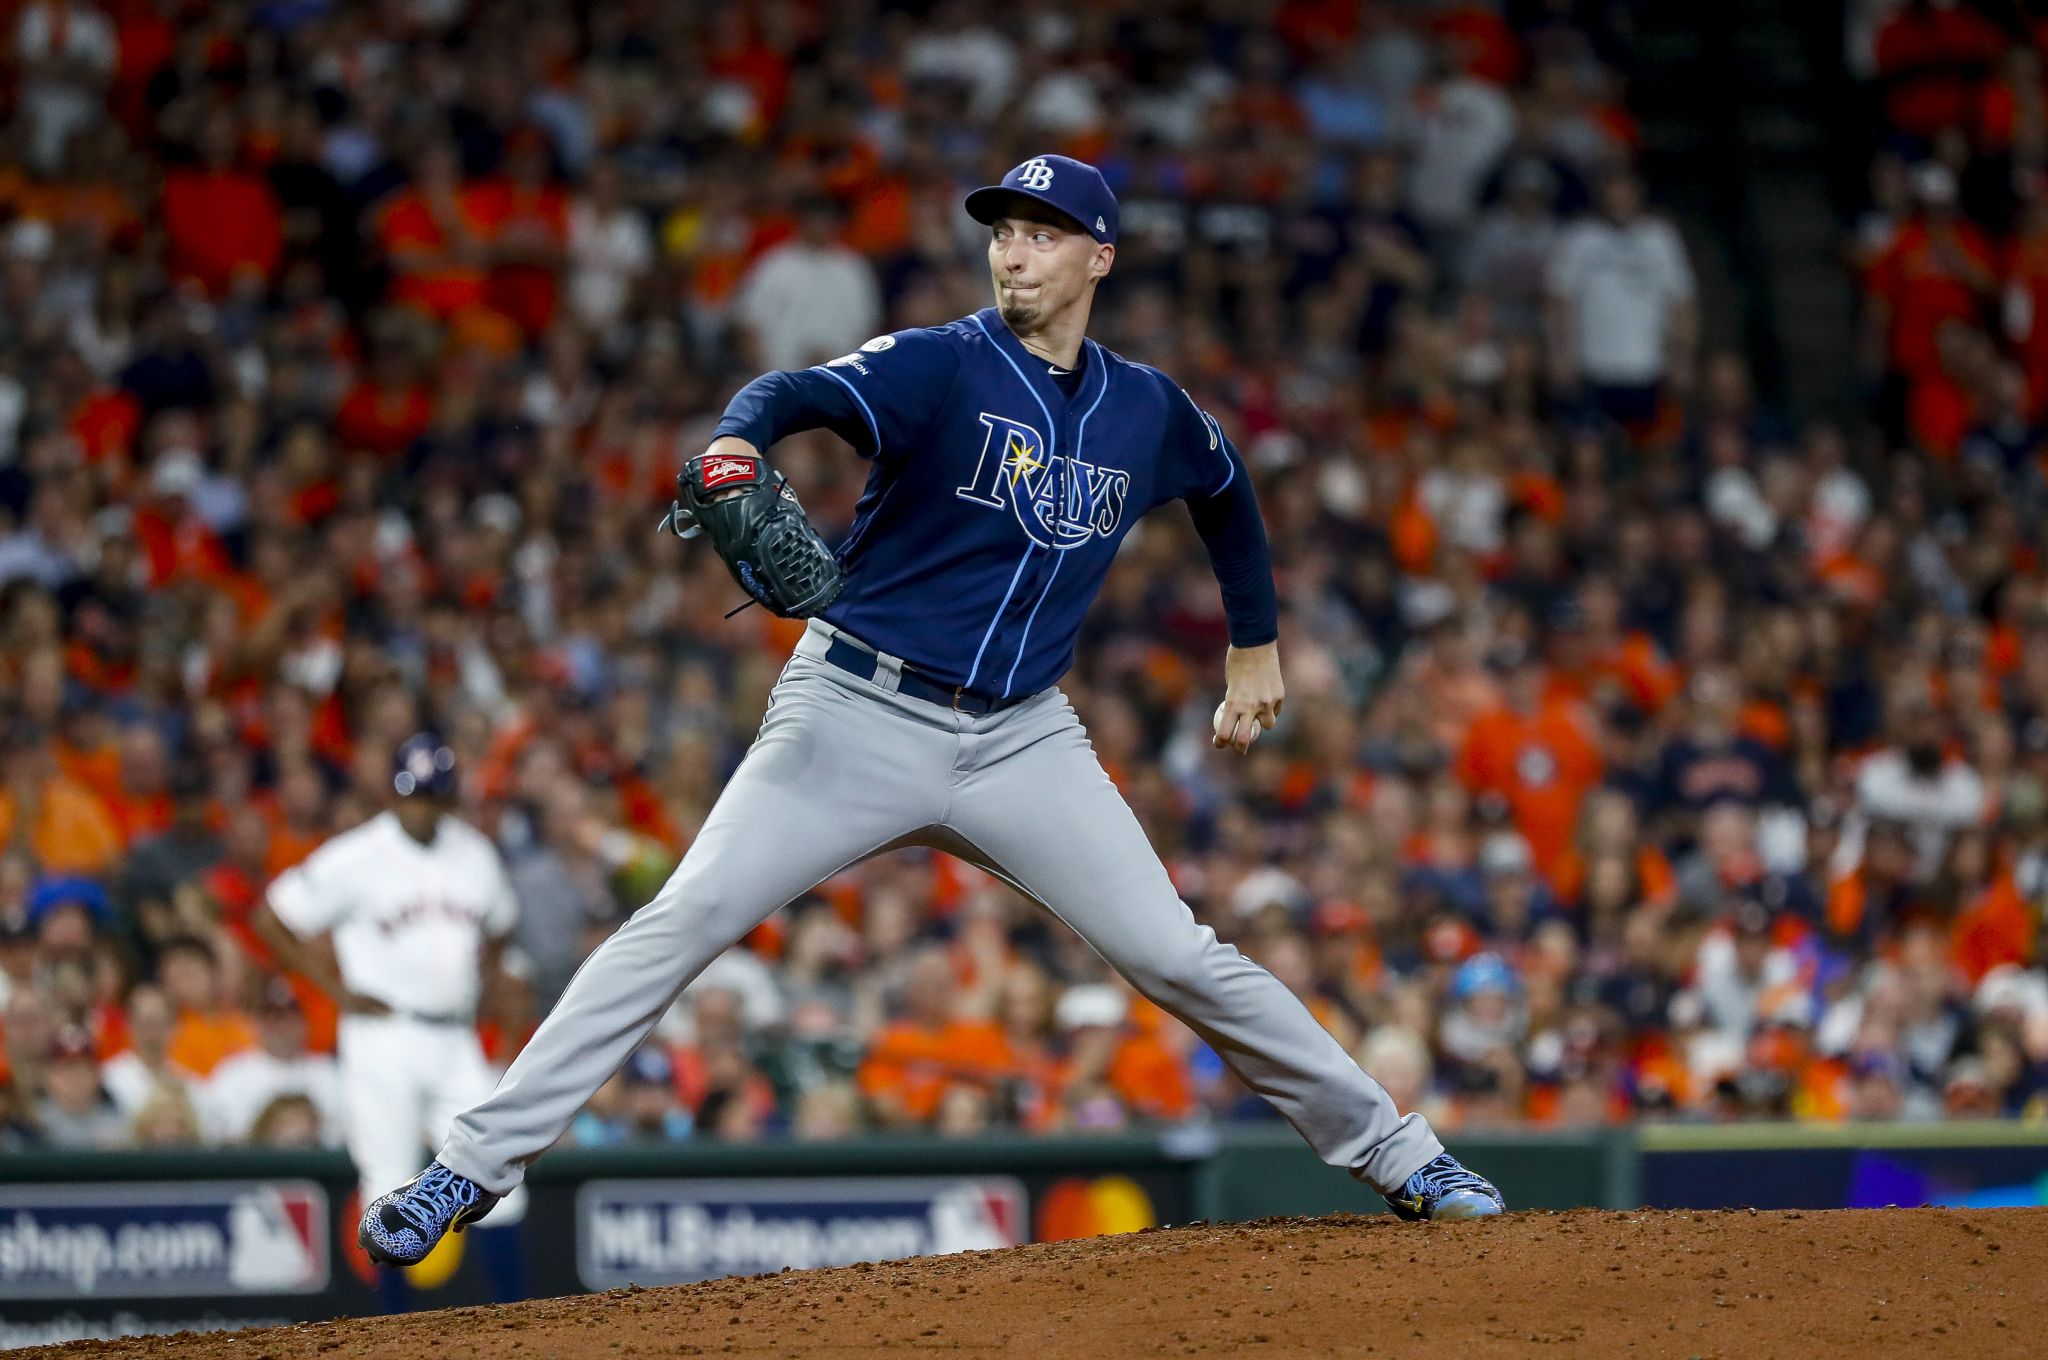 San Diego Padres close to blockbuster trade for star pitcher Blake Snell, MLB